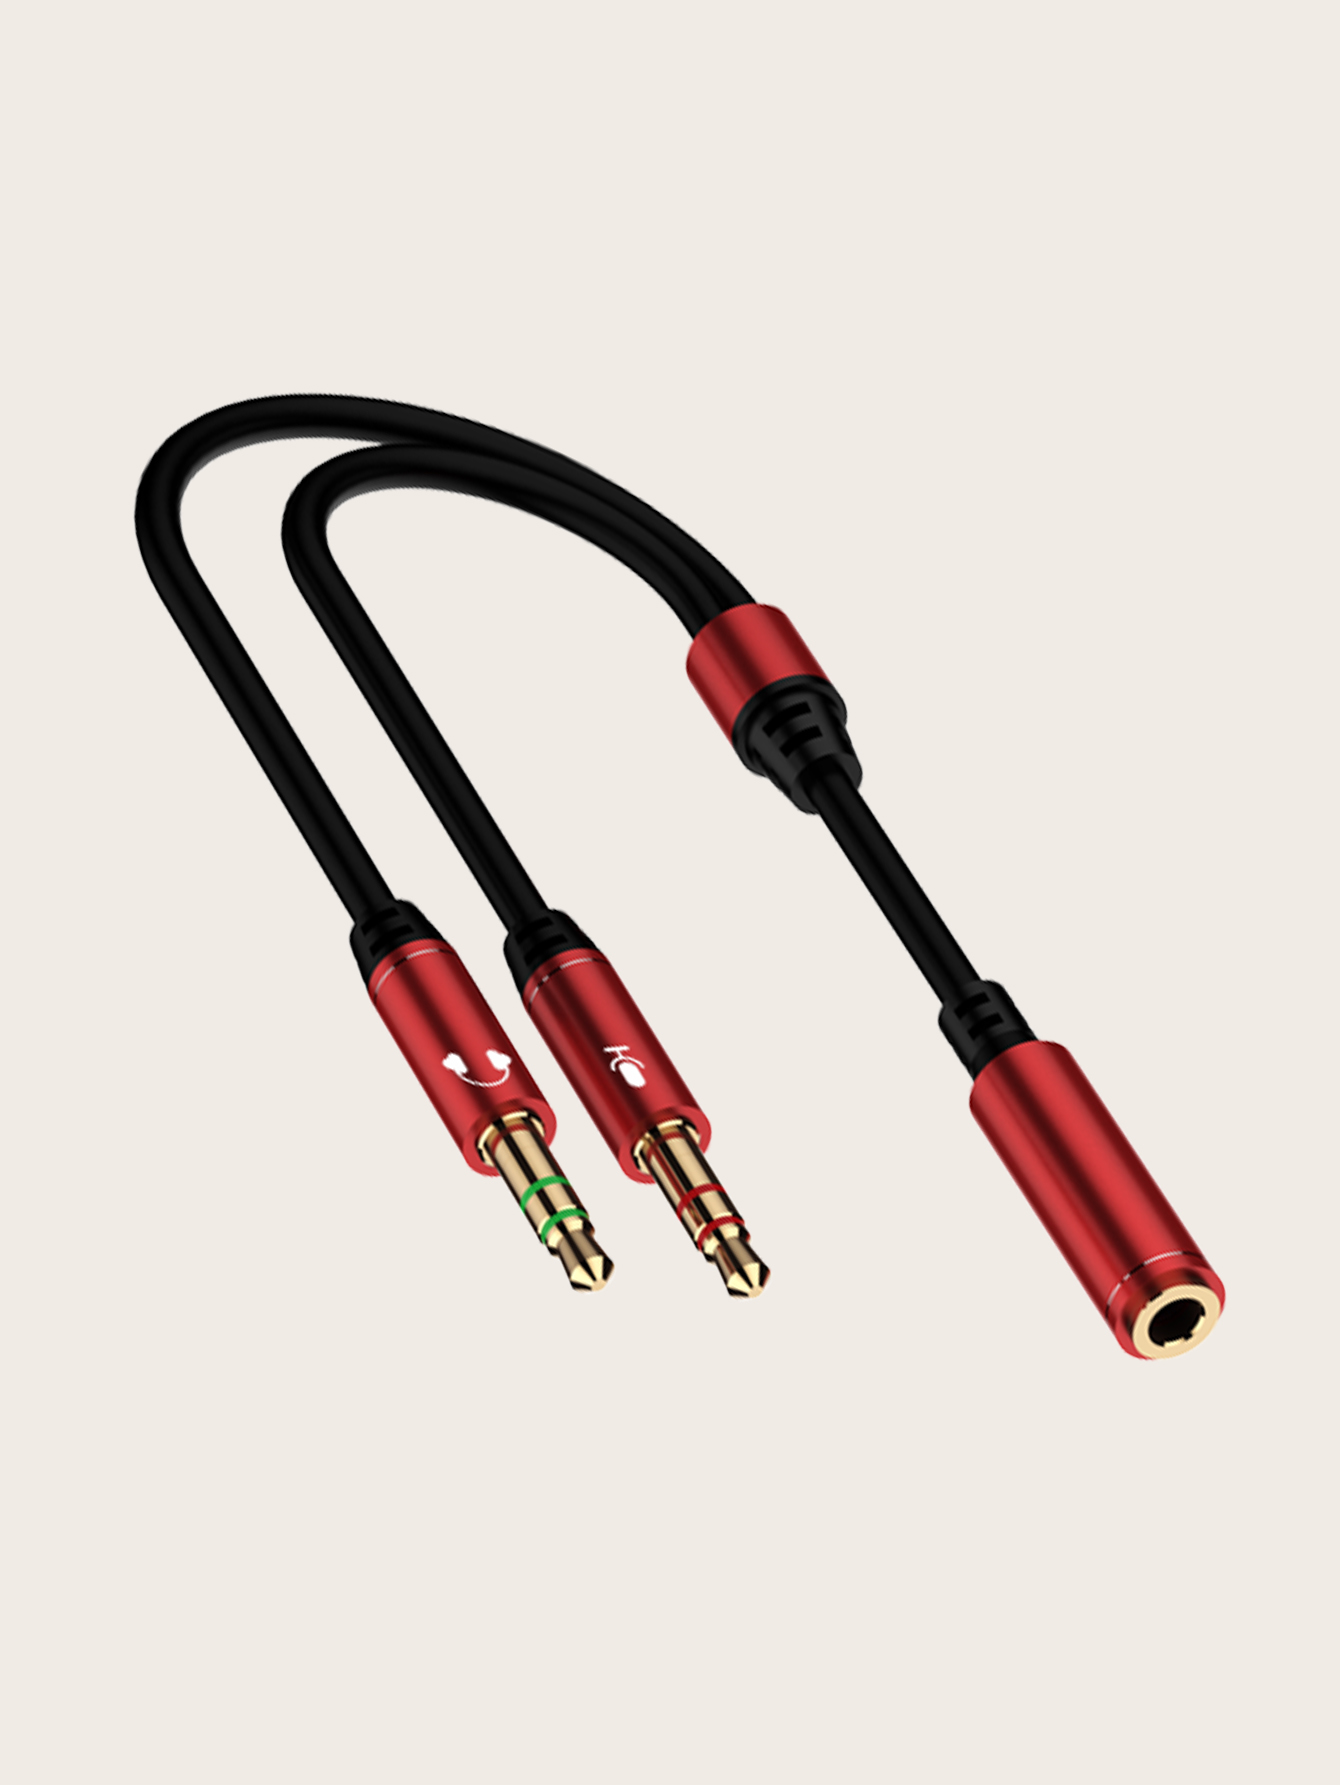 BYZ-BC-022-35mm-Male-to-Aux-to-Dual-35mm-Female-Audio-Cable-Adapter-with-Mic-for-Wired-Earphones-Mob-1826438-2